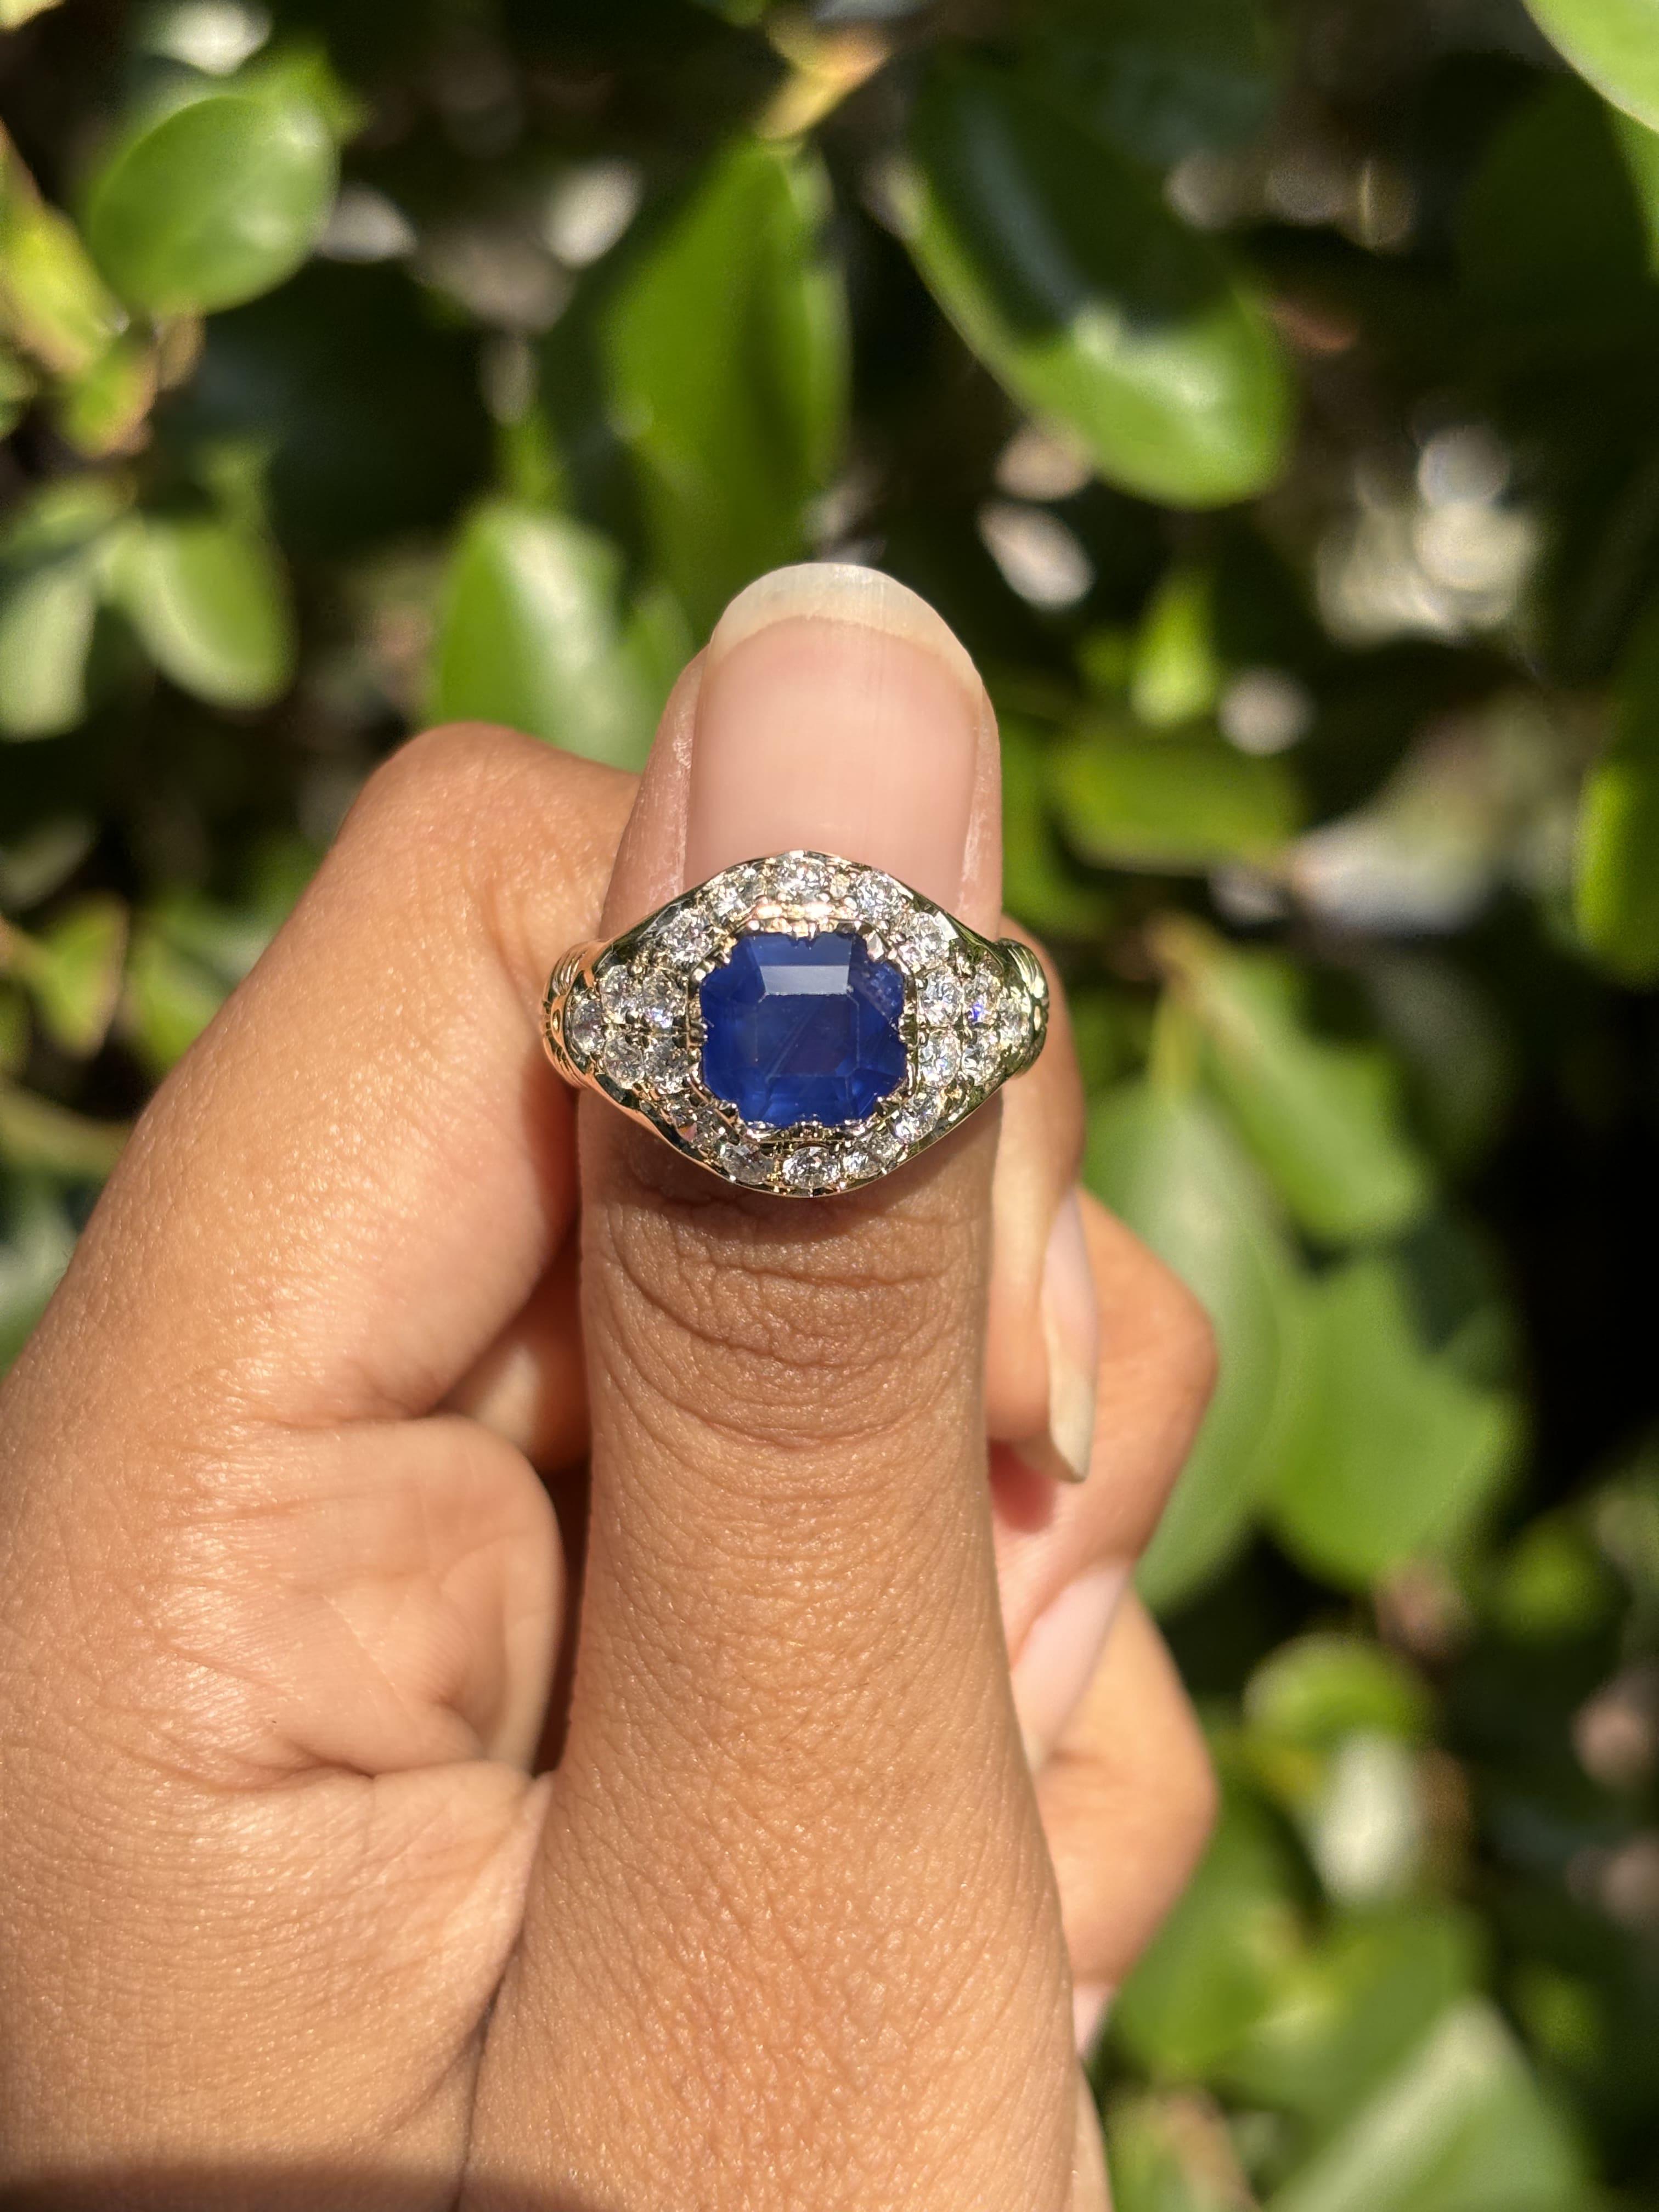   2.64 Carat Royal Blue Sapphire Ring with Old Mine Cut Diamonds in 18K Gold 4